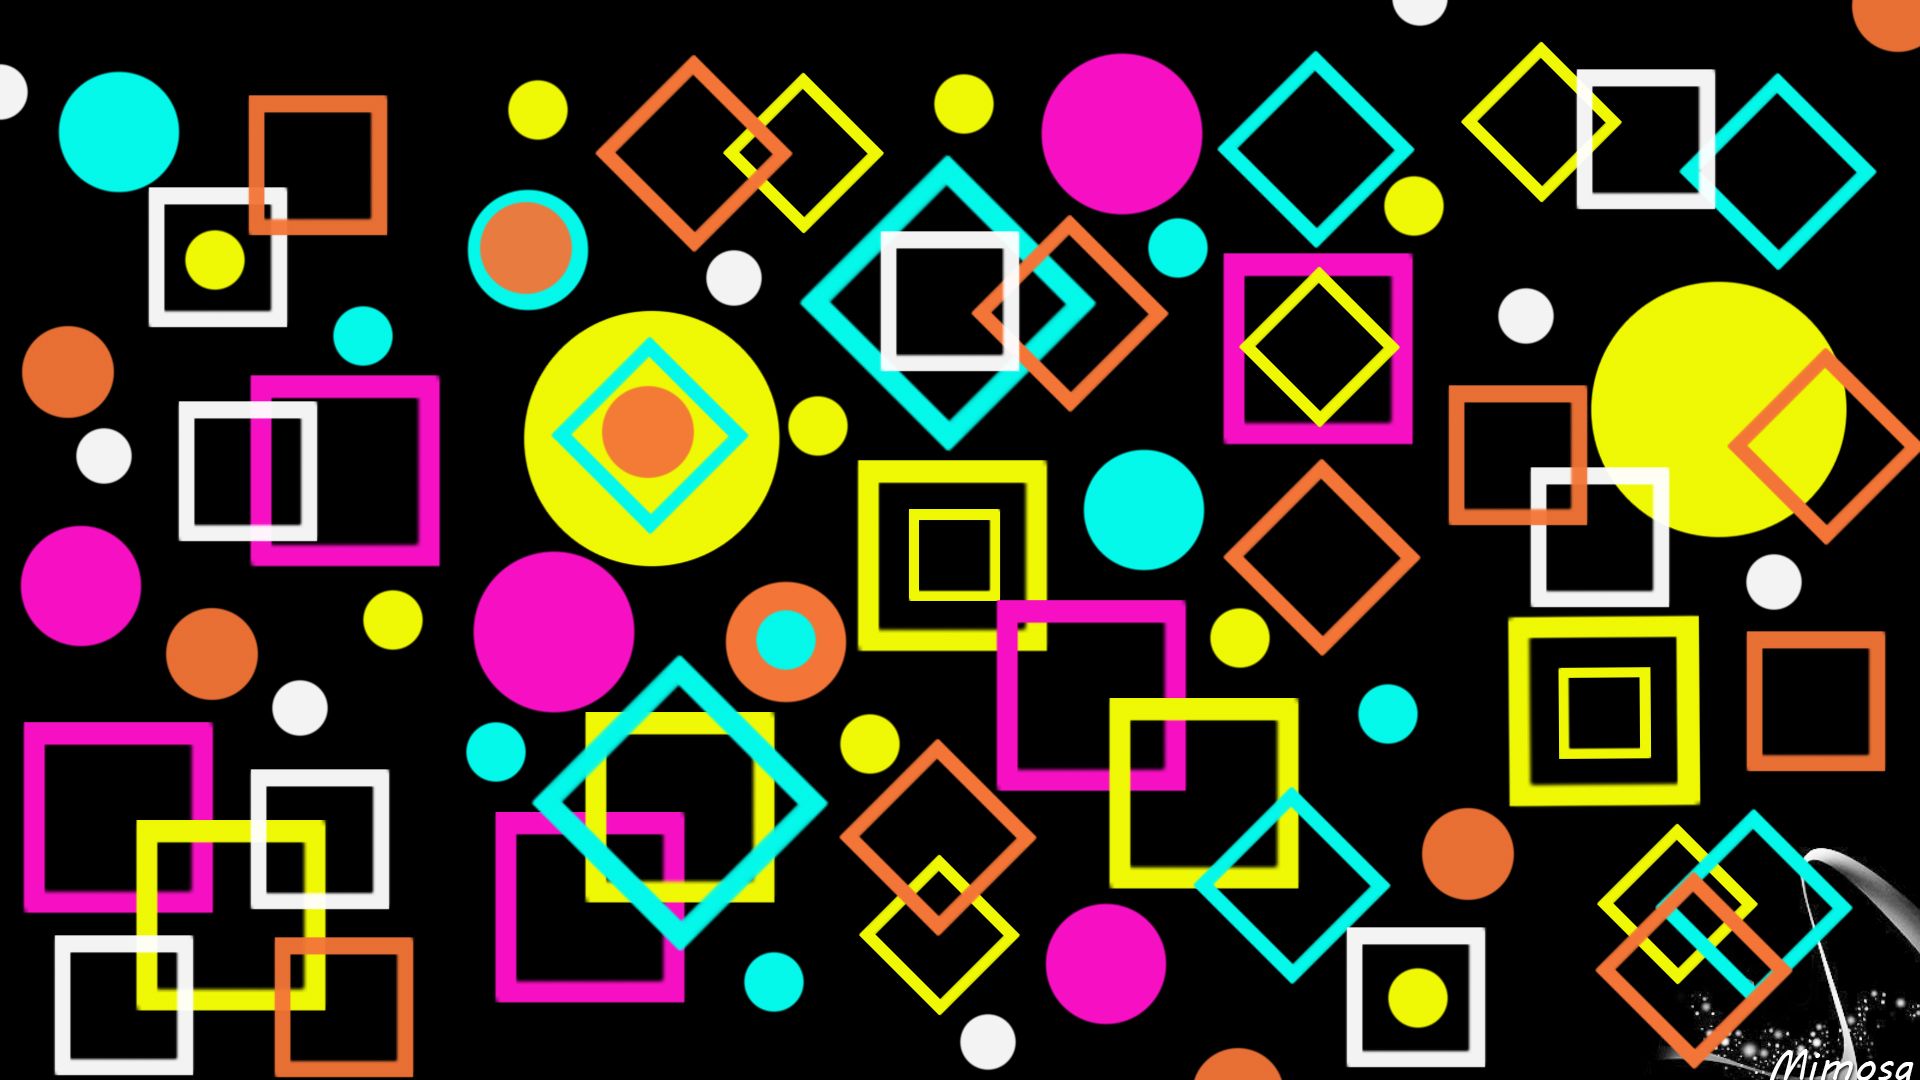 Abstract Colorful Colors Digital Art Geometry Shapes Wallpaper:1920x1080